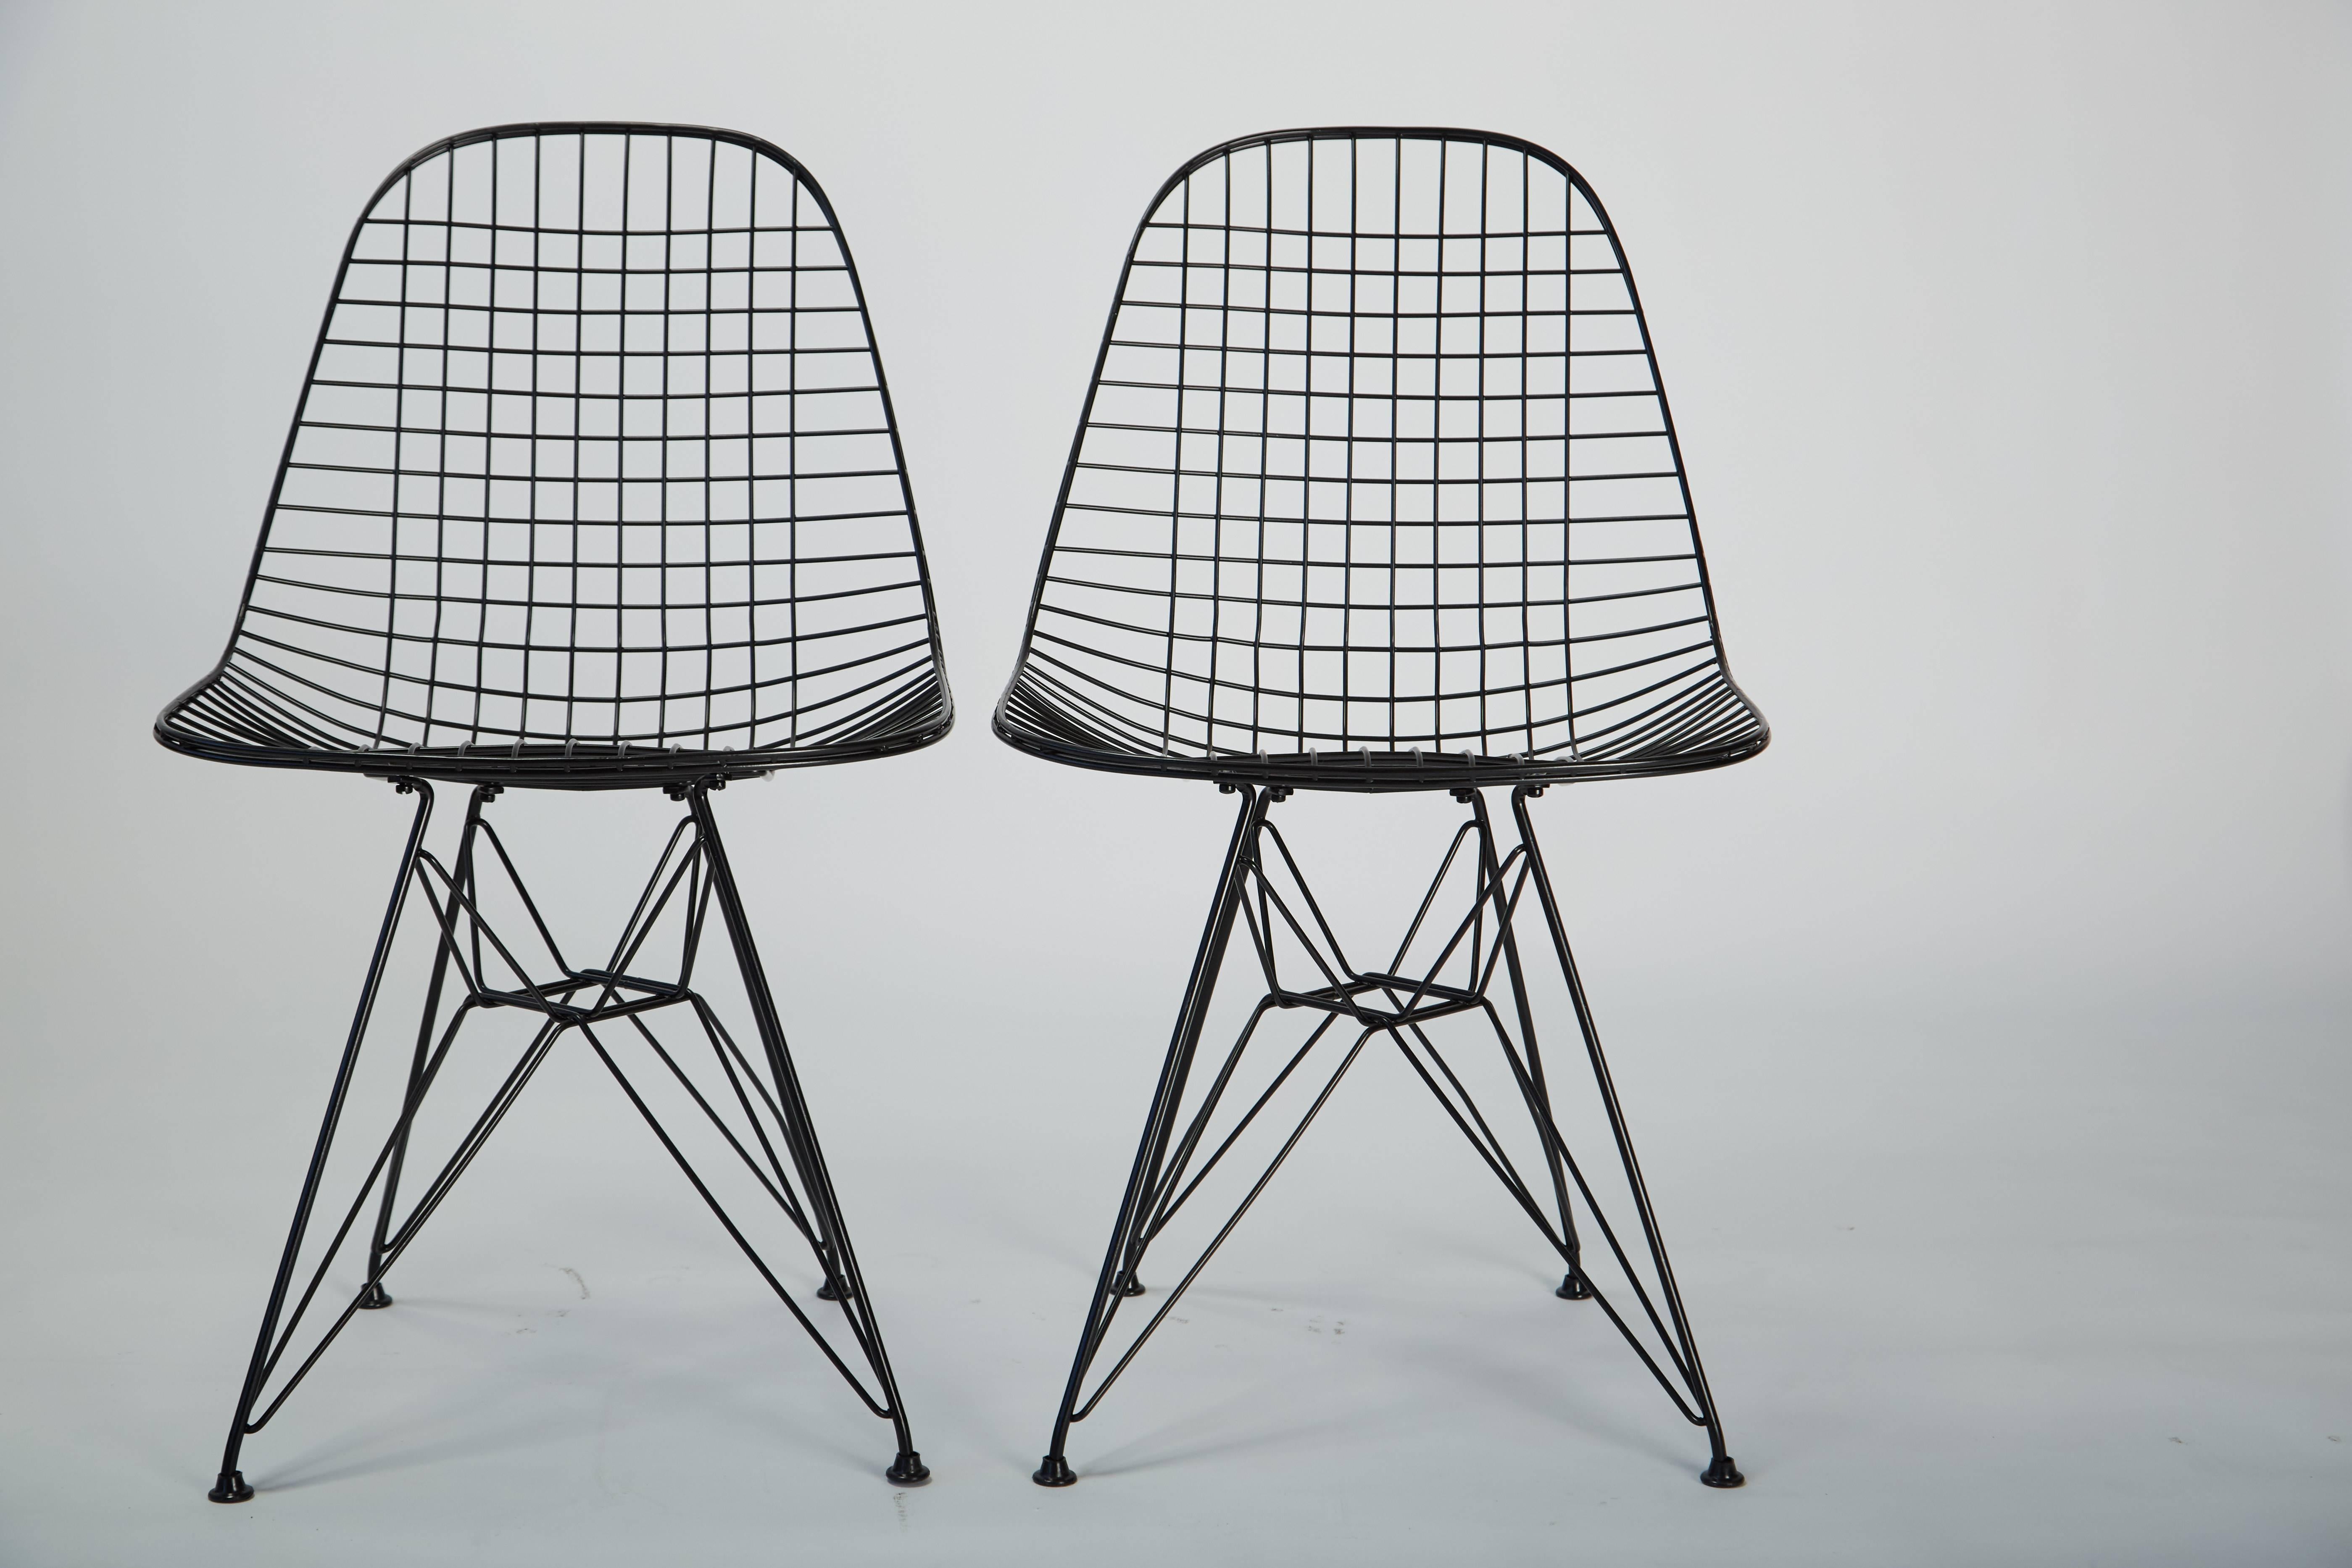 Powder-Coated Pair of Eames Wire Chairs DKR Eiffel Tower Base